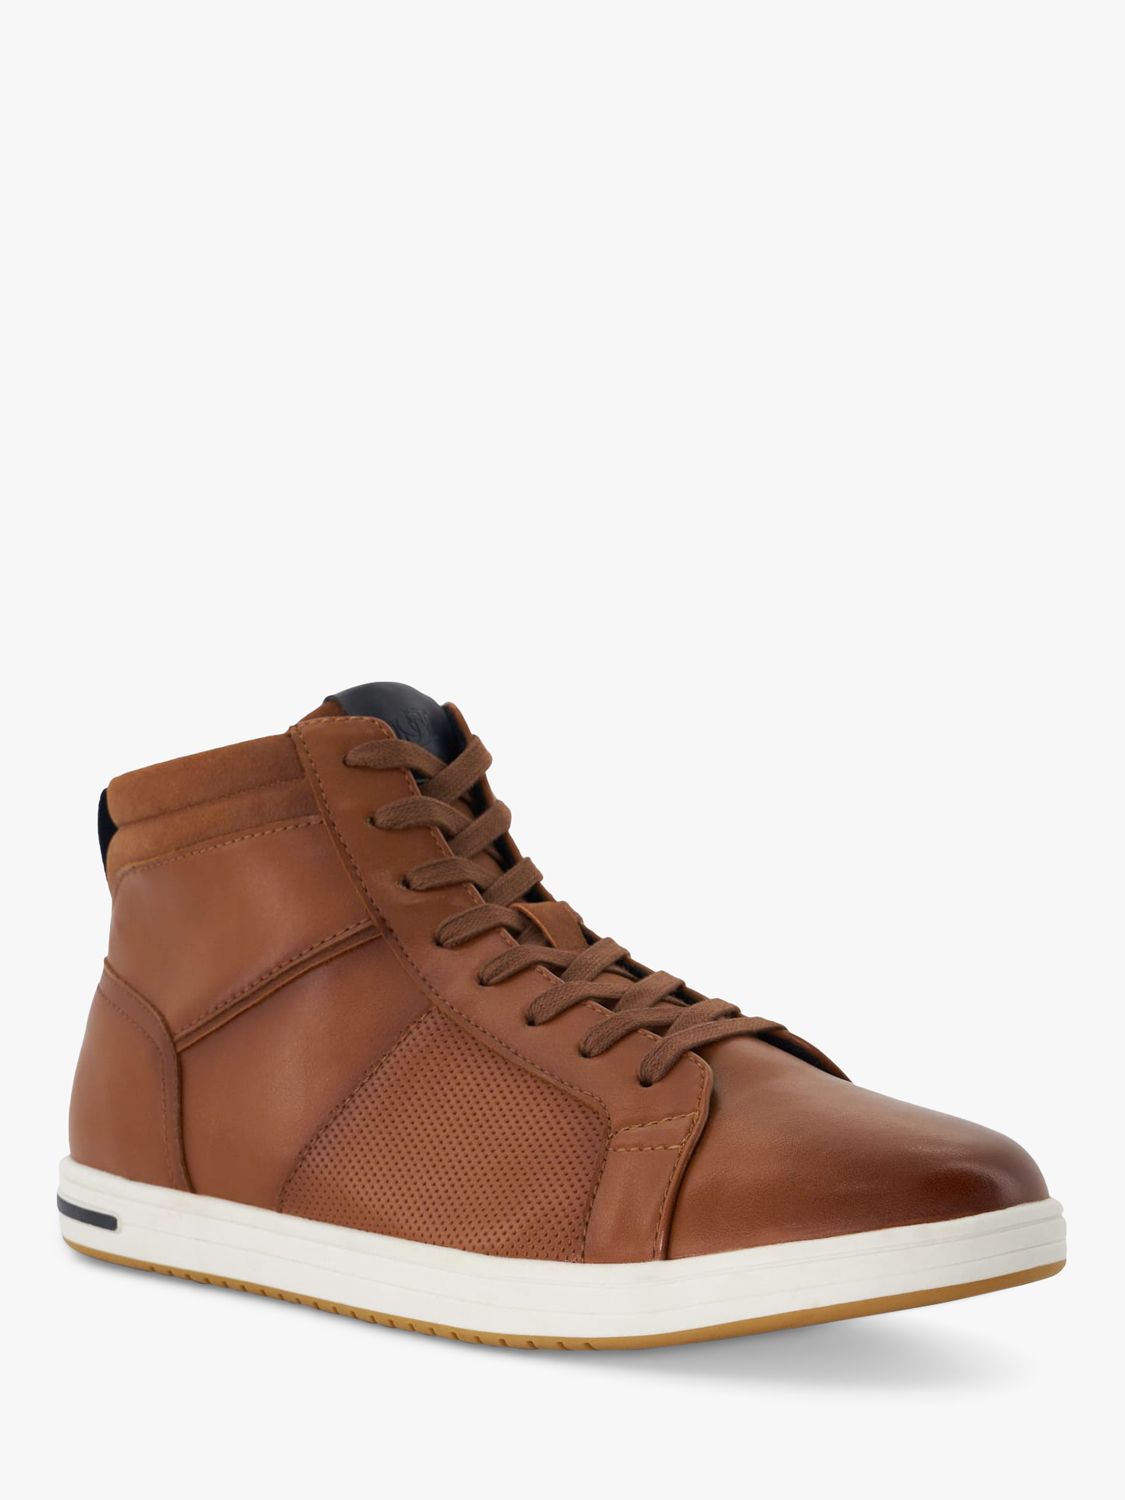 Buy Dune Sezzy Synthetic High-Top Trainers, Tan Online at johnlewis.com